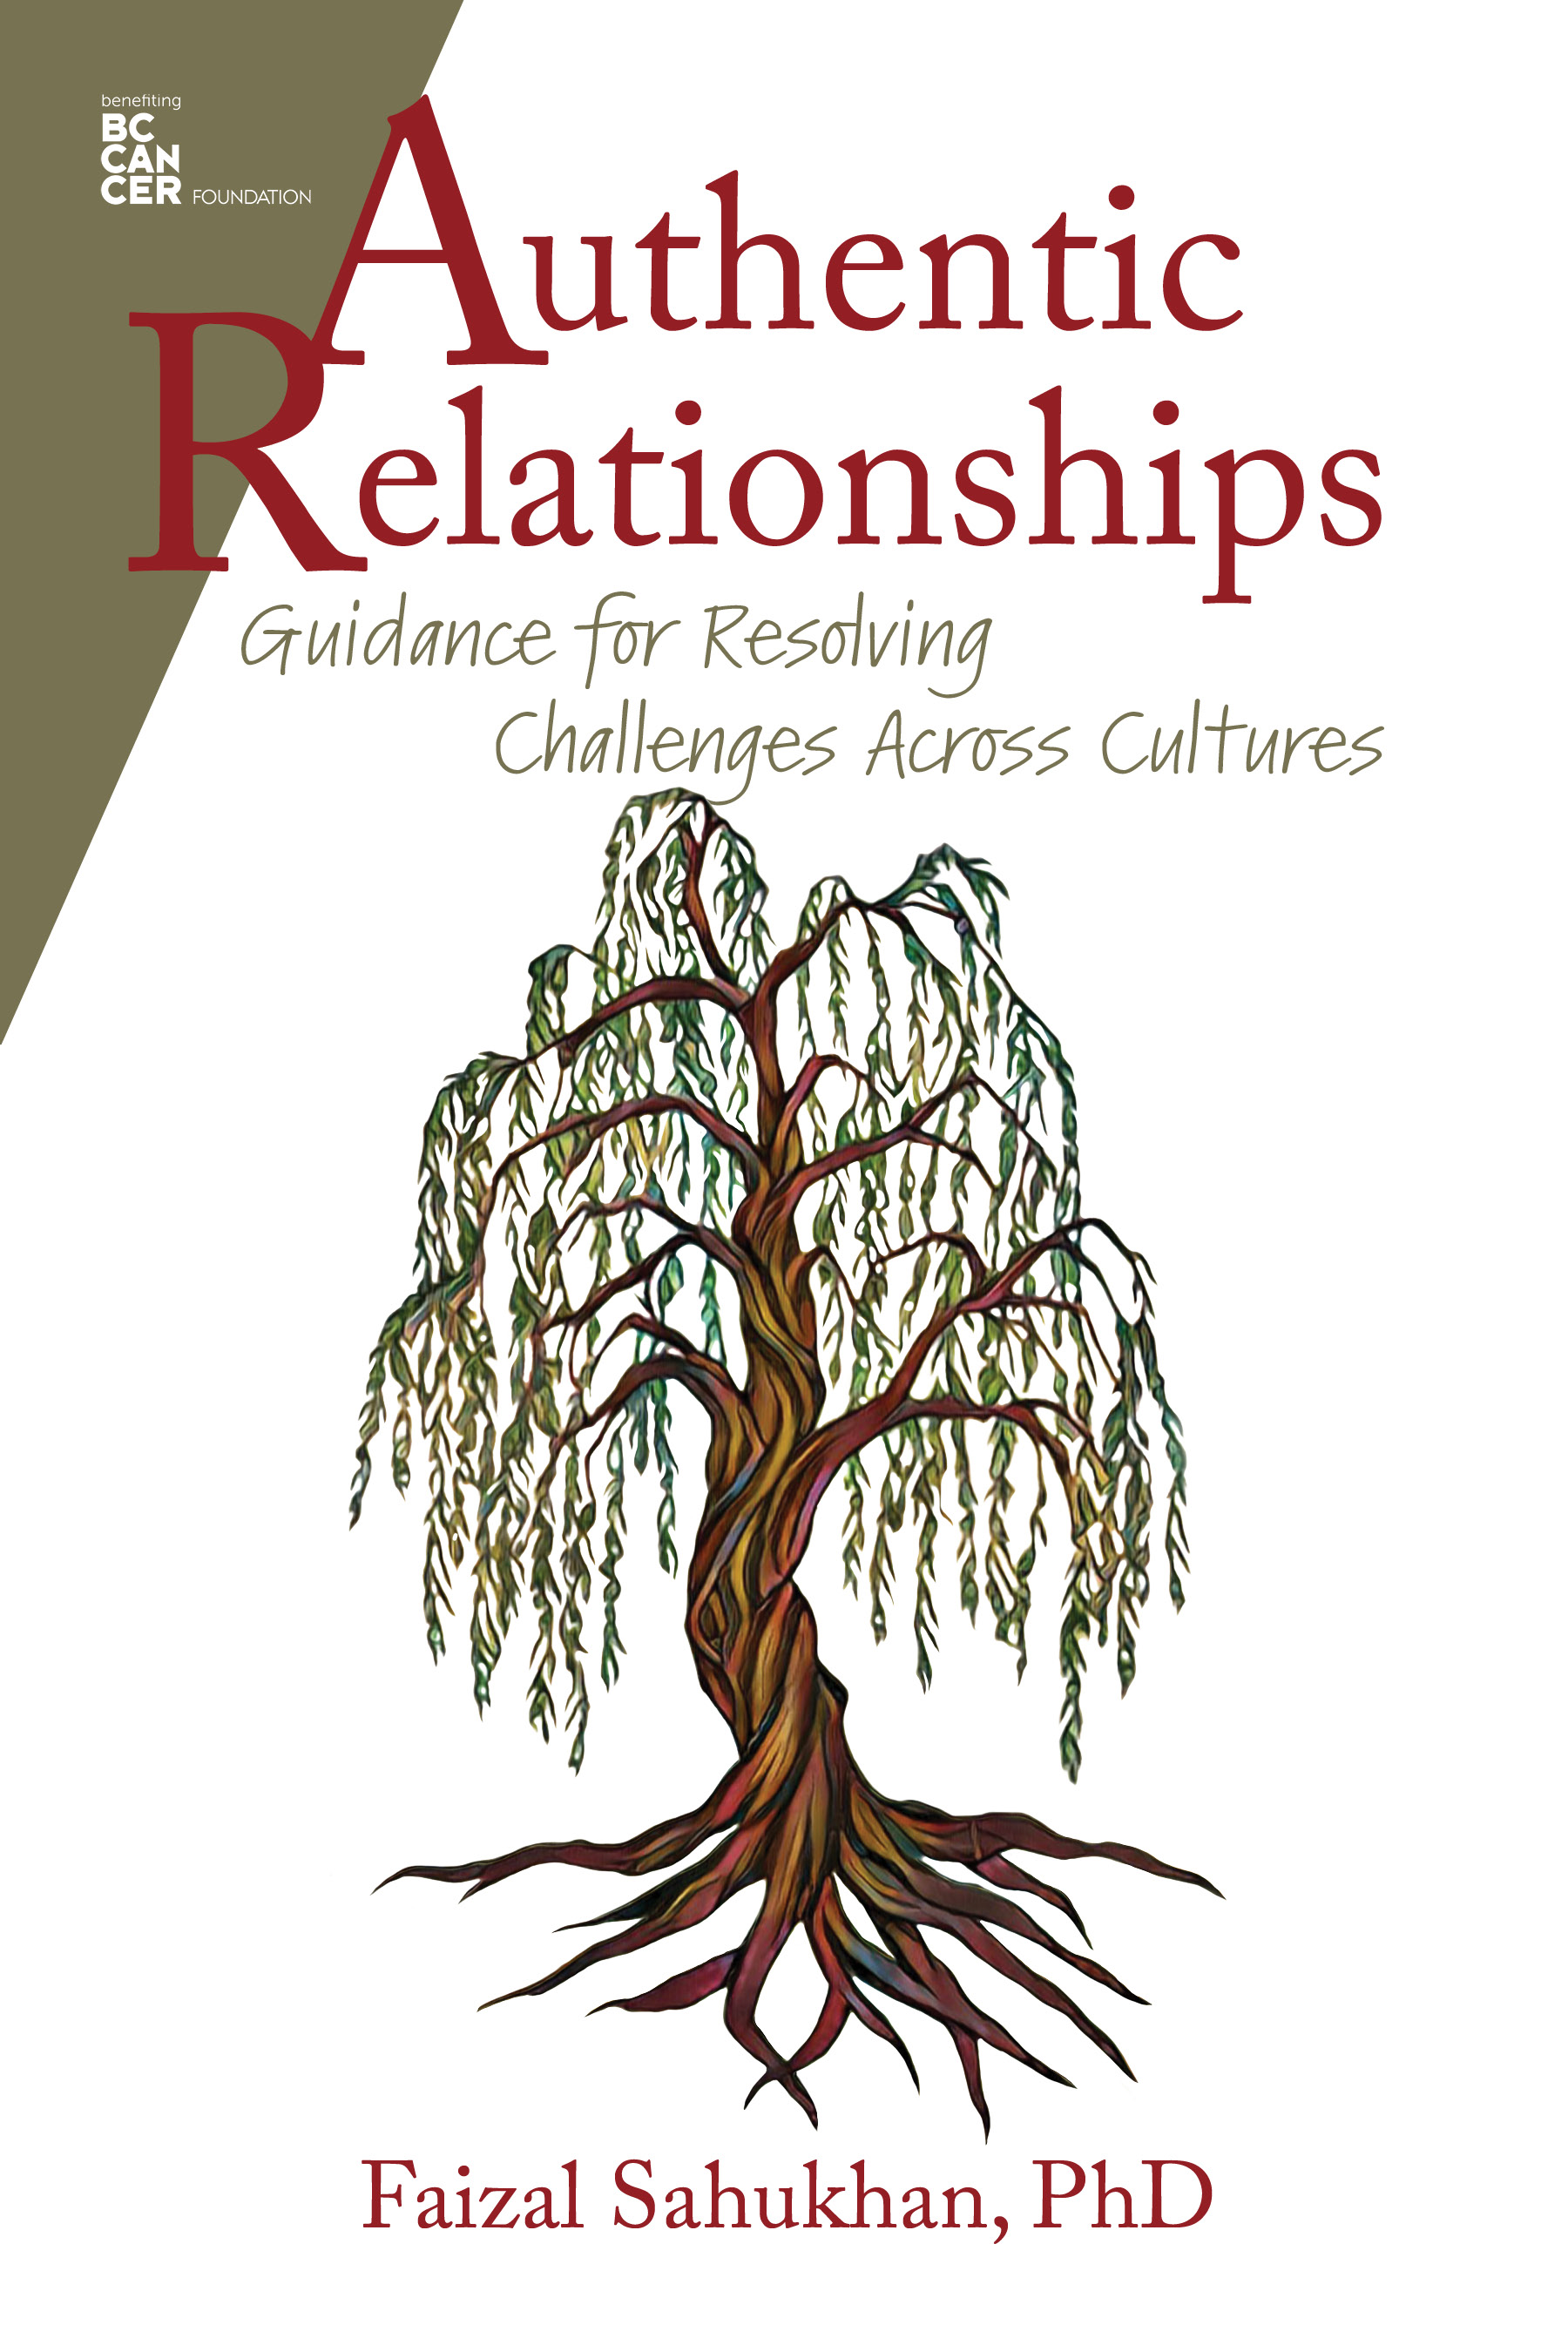 Authentic Relationships by Dr. Faizal Sahukhan